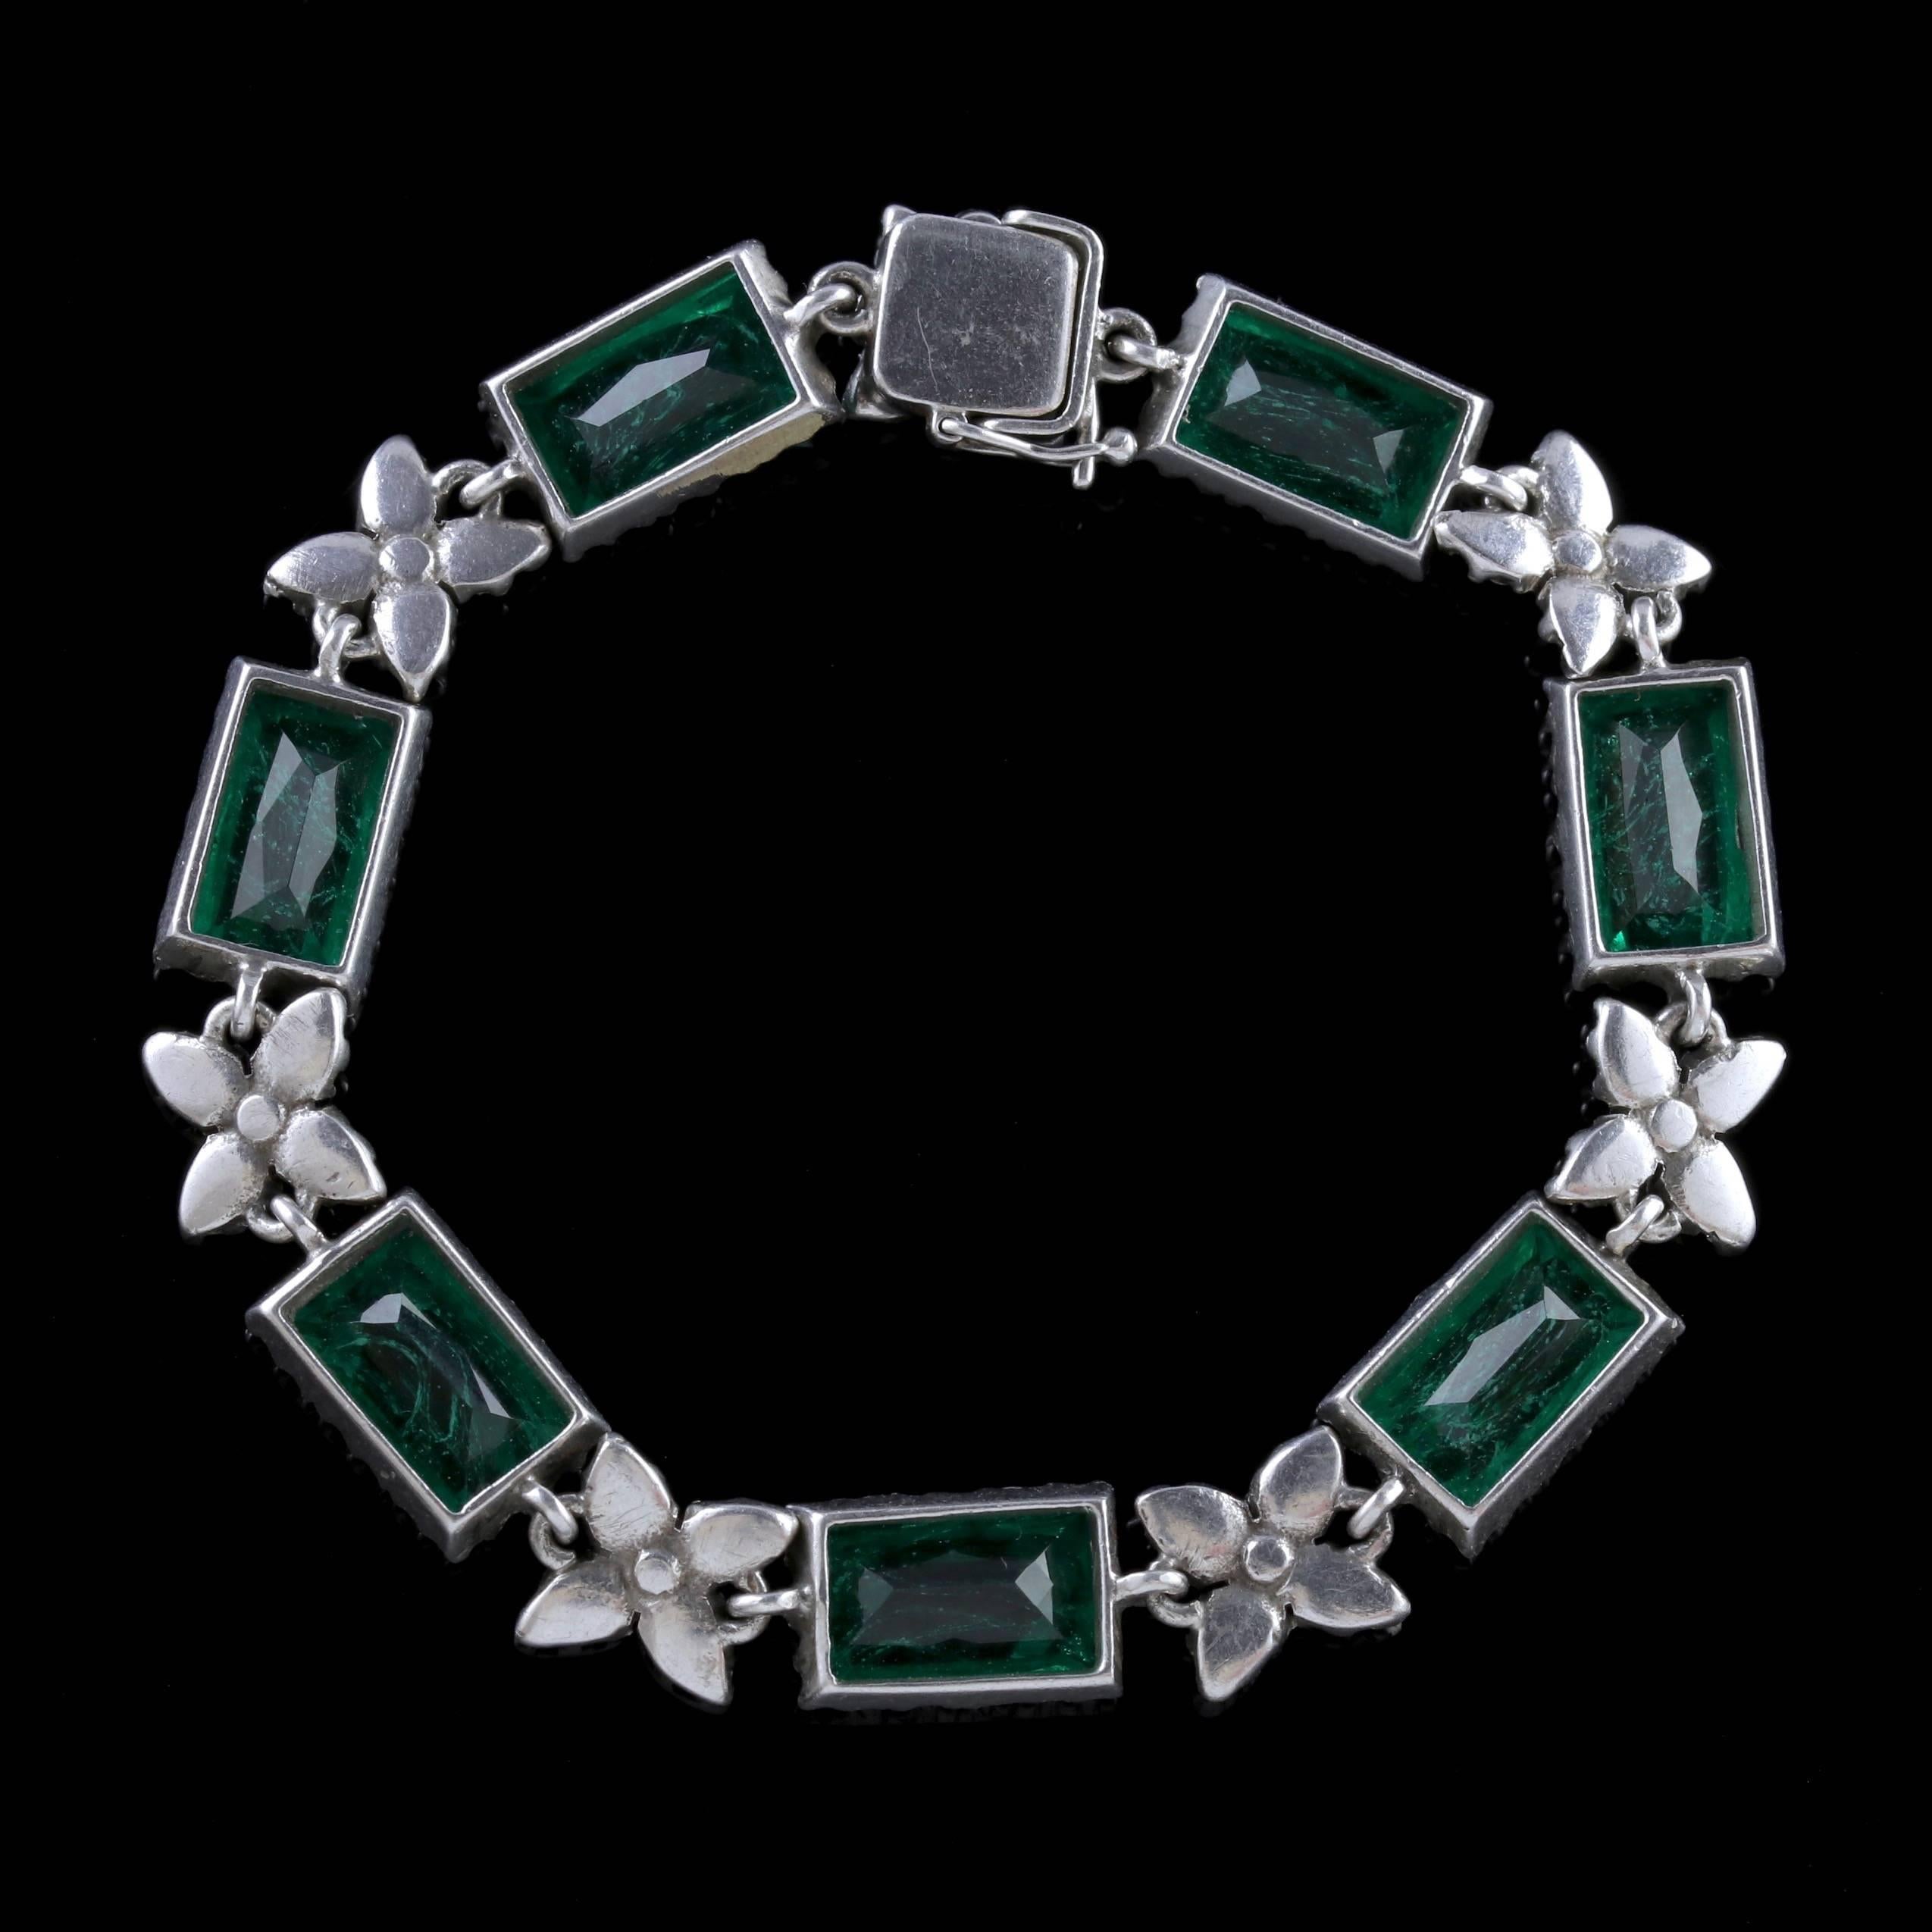 To read more please click continue reading below-



The bracelet is made up of fabulous Emerald green Paste Stones with sparkling white Paste links in-between.


The bracelet is all set in Silver and fitted with a secure safety clasp. 

This is a